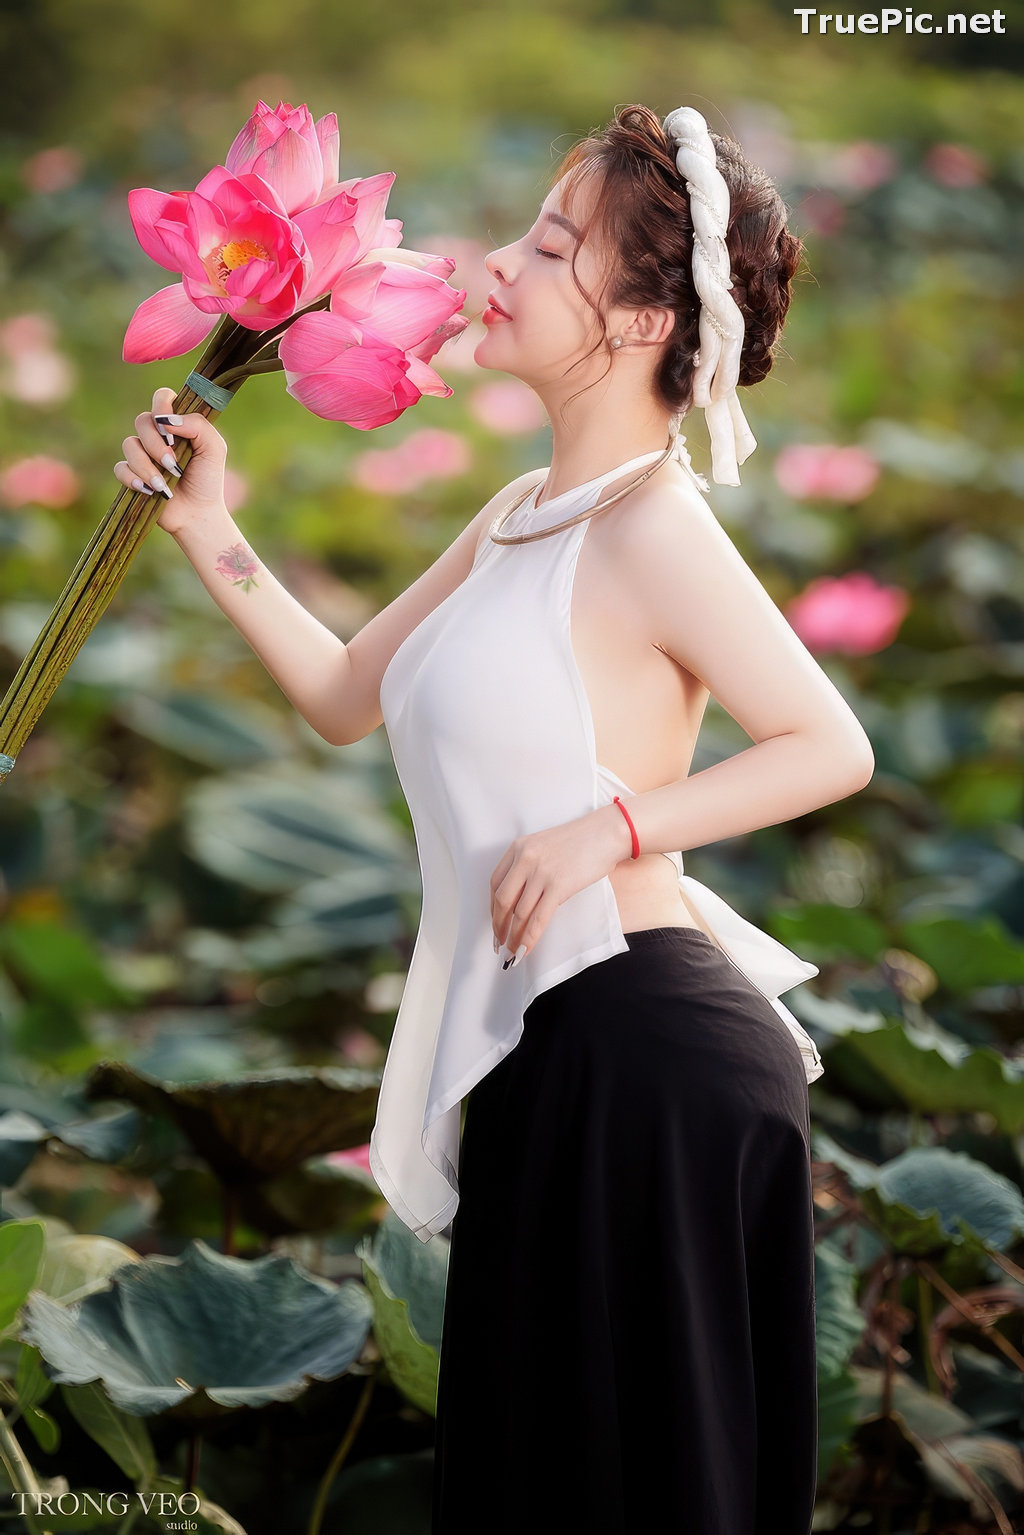 Image Vietnamese Model - Beautiful Girl and Lotus Flower - TruePic.net (56 pictures) - Picture-7